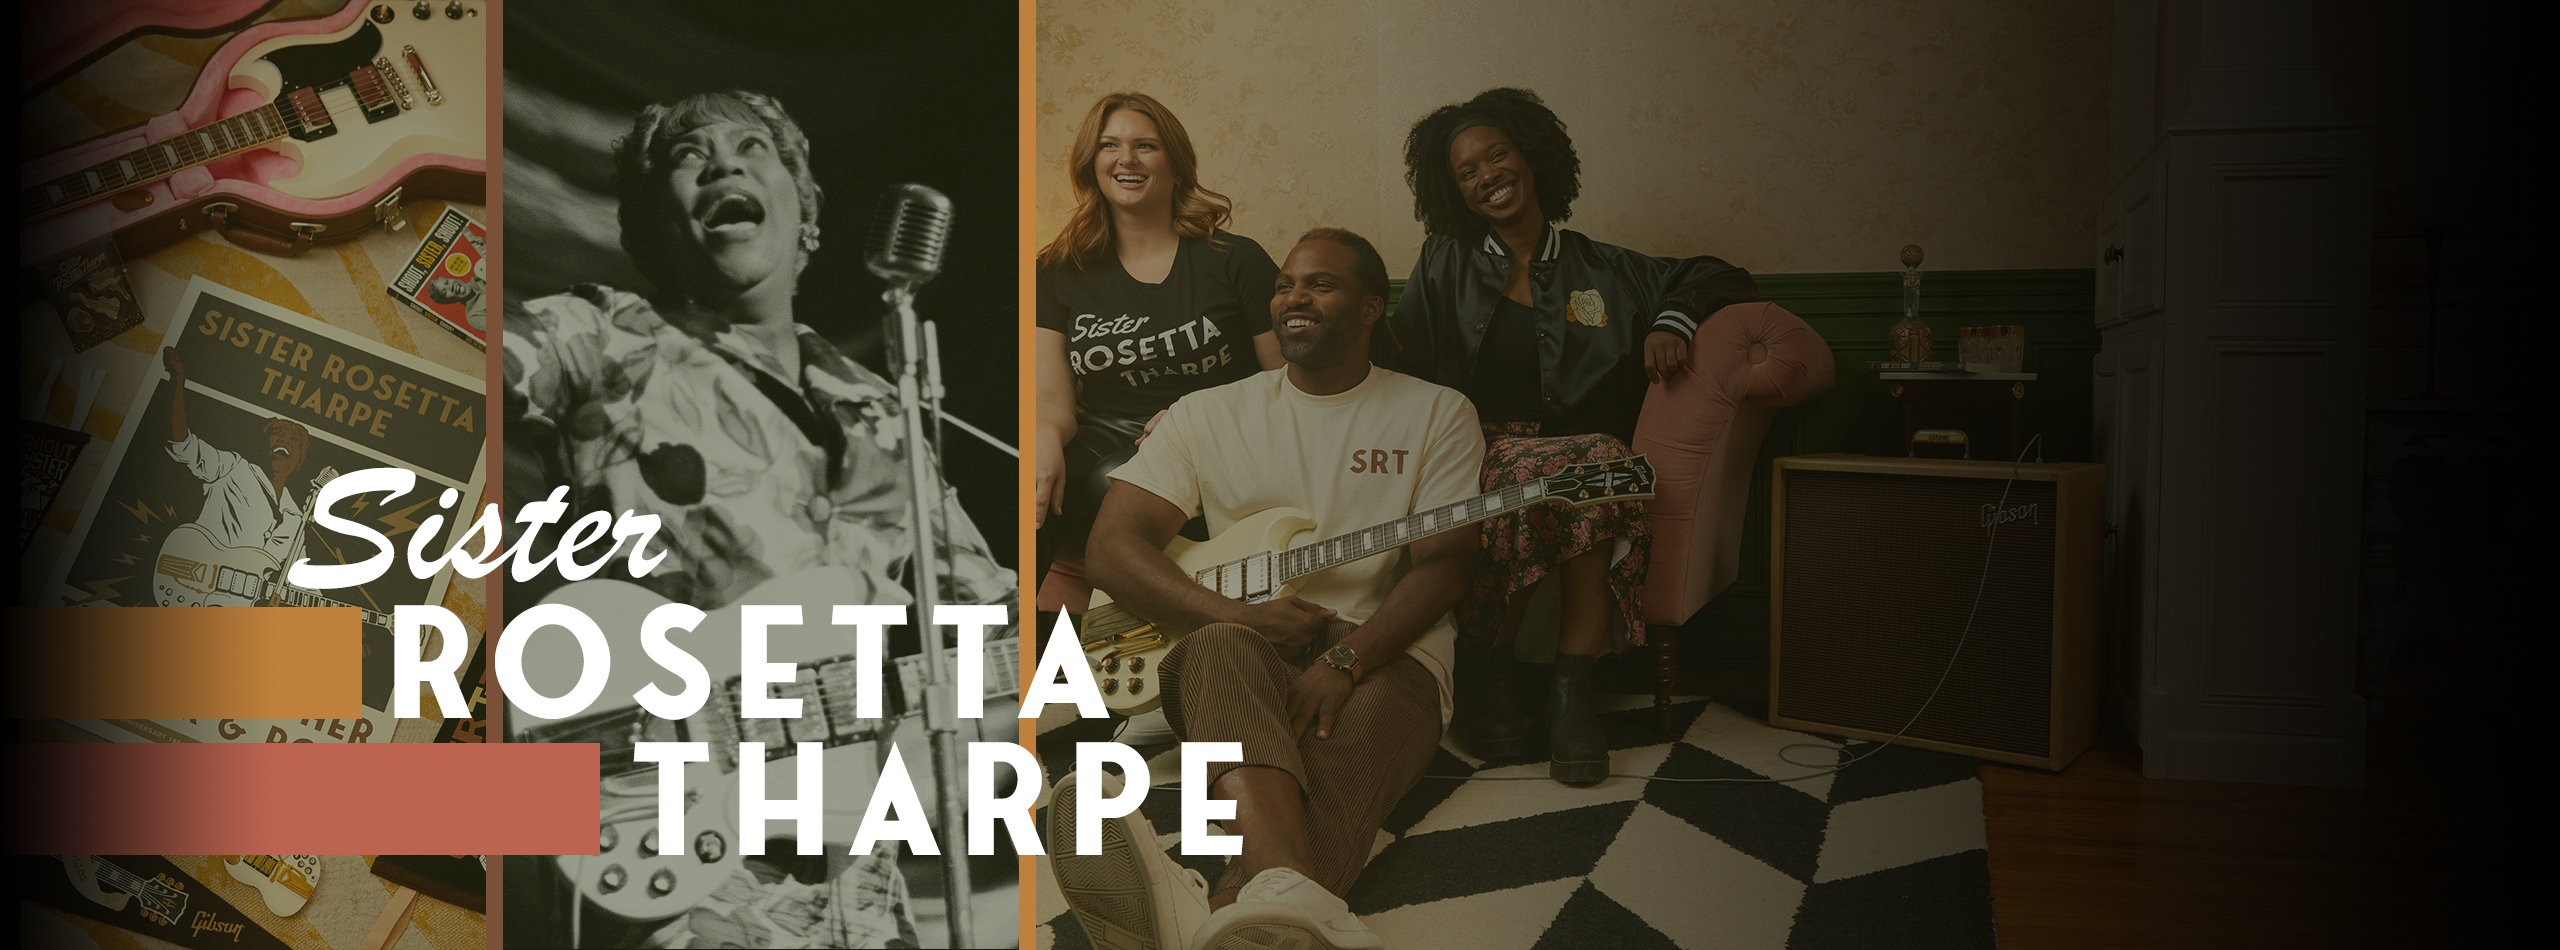 A Group of friends, decked out in our Sister Rosetta Tharpe merch, enjoying sister rosetta tharpe's music. Introducing our newest collection of Artist Merchandise and Apparel honoring the legendary Sister Rosetta Tharpe.